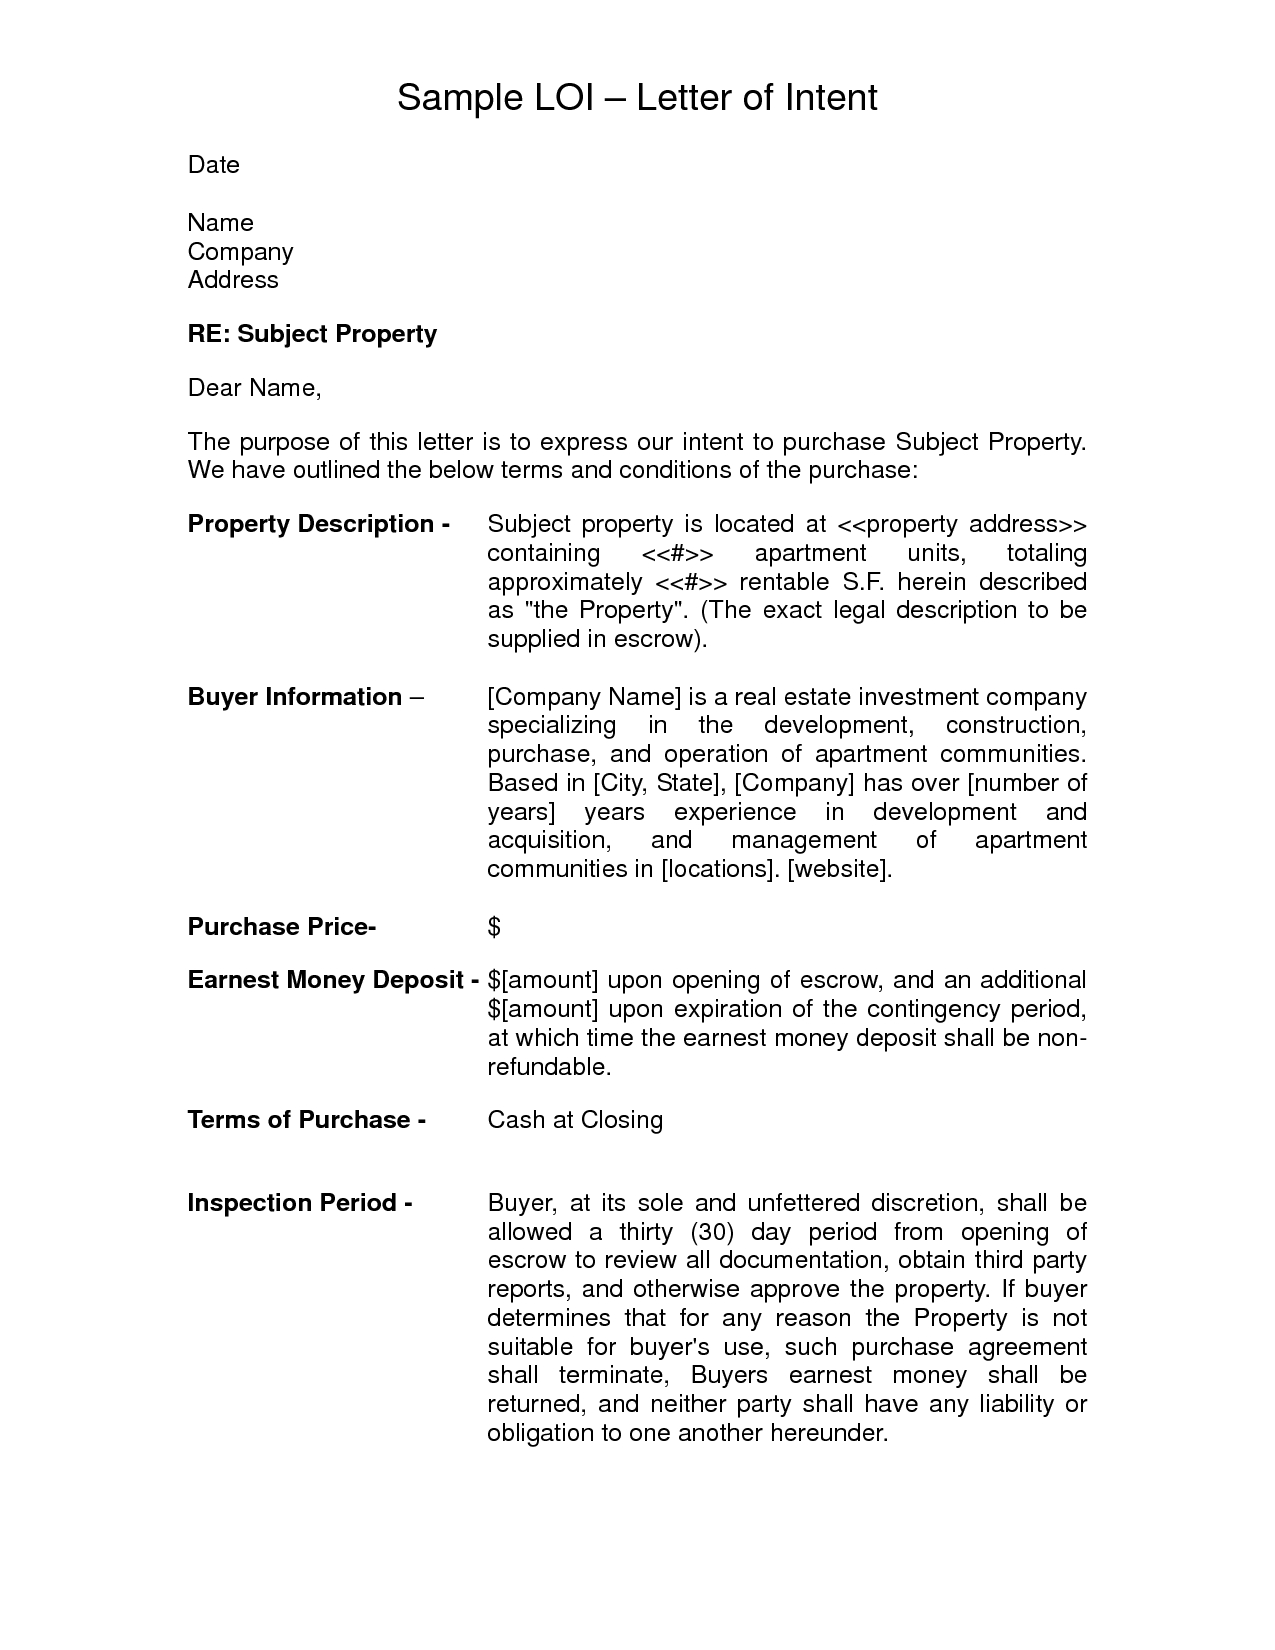 Commercial Lease Letter Of Intent Template - Letter Intent to Purchase Property Template Best S Proposal